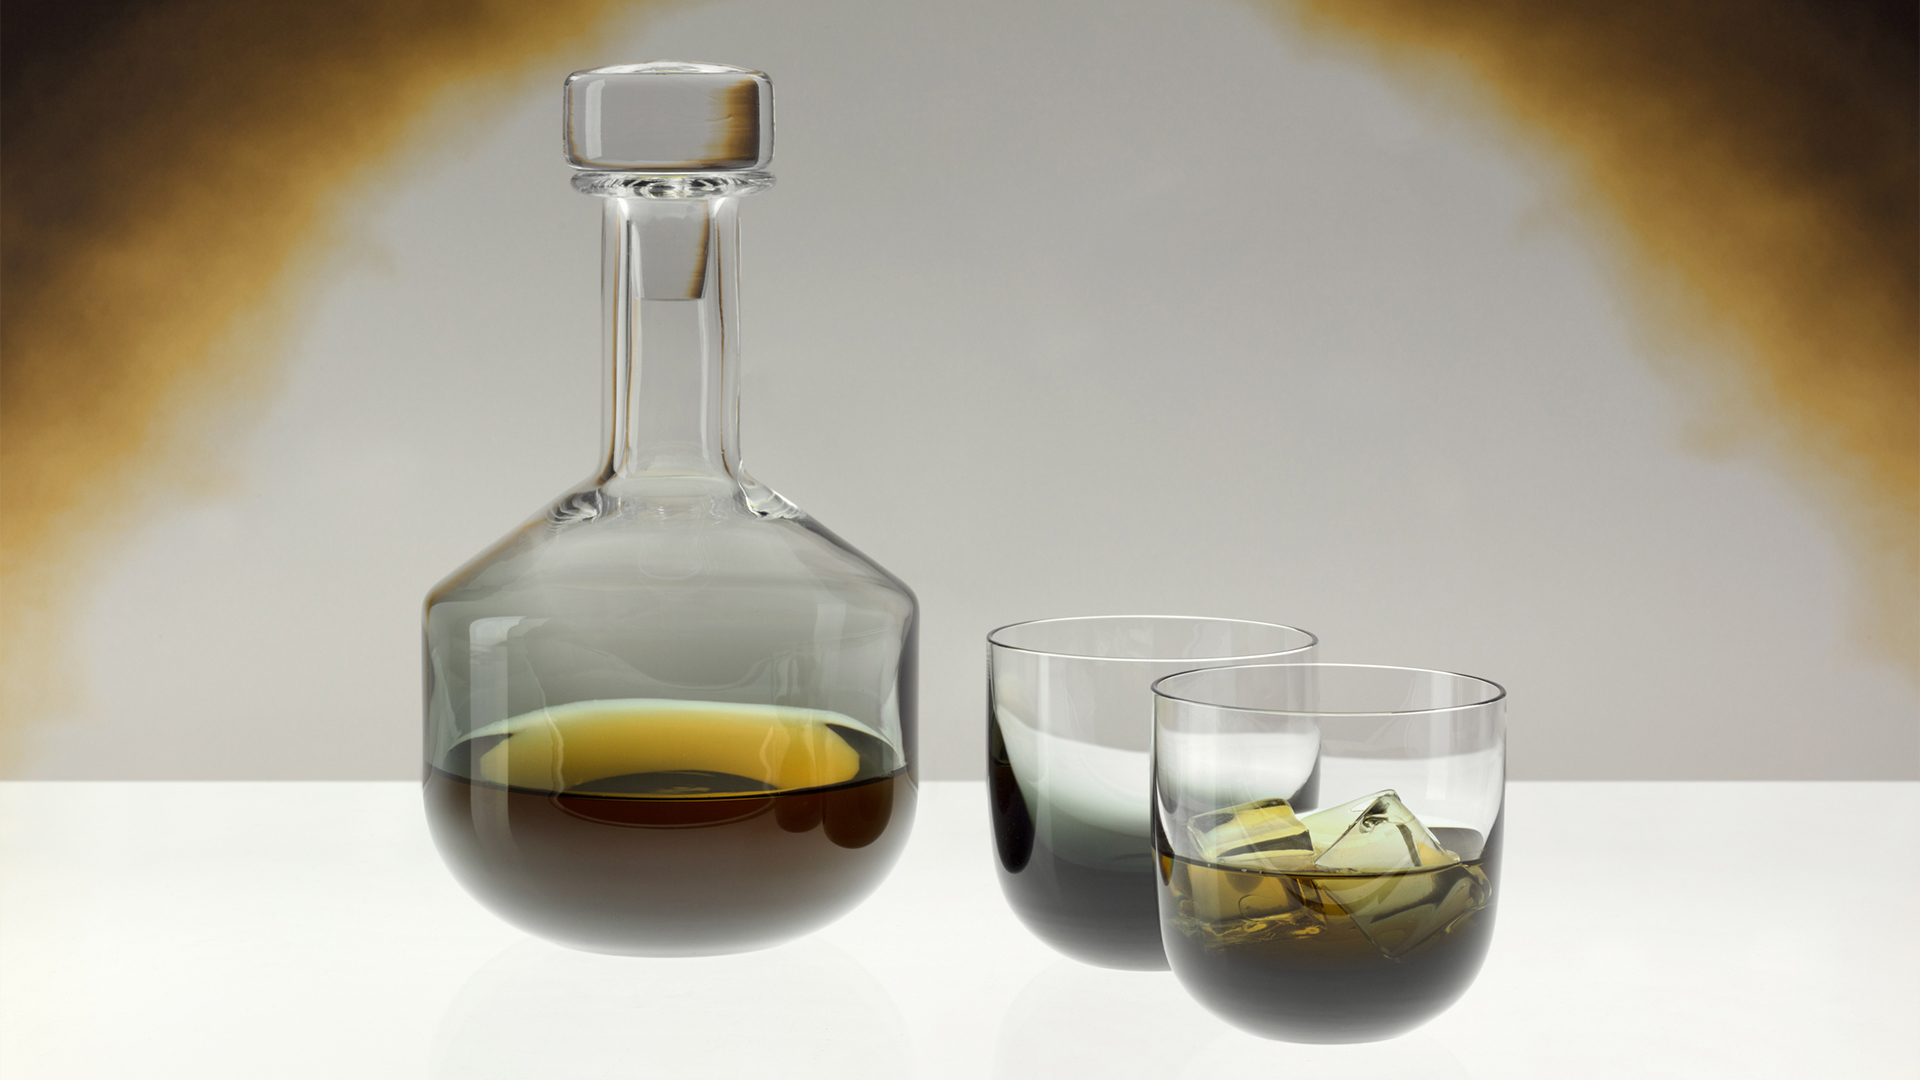 Whisky Decanter & Glasses, Lifestyle